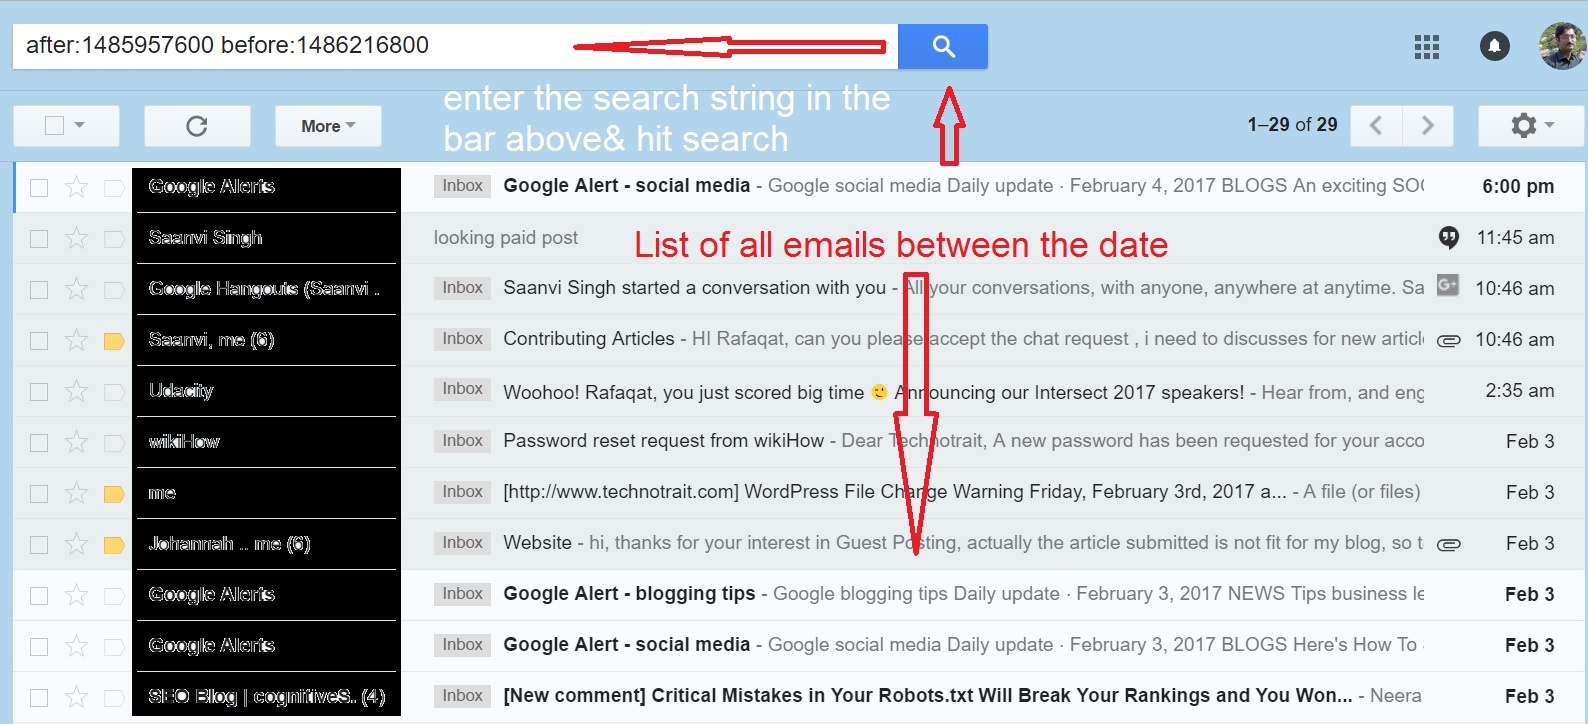 Search gmail by date